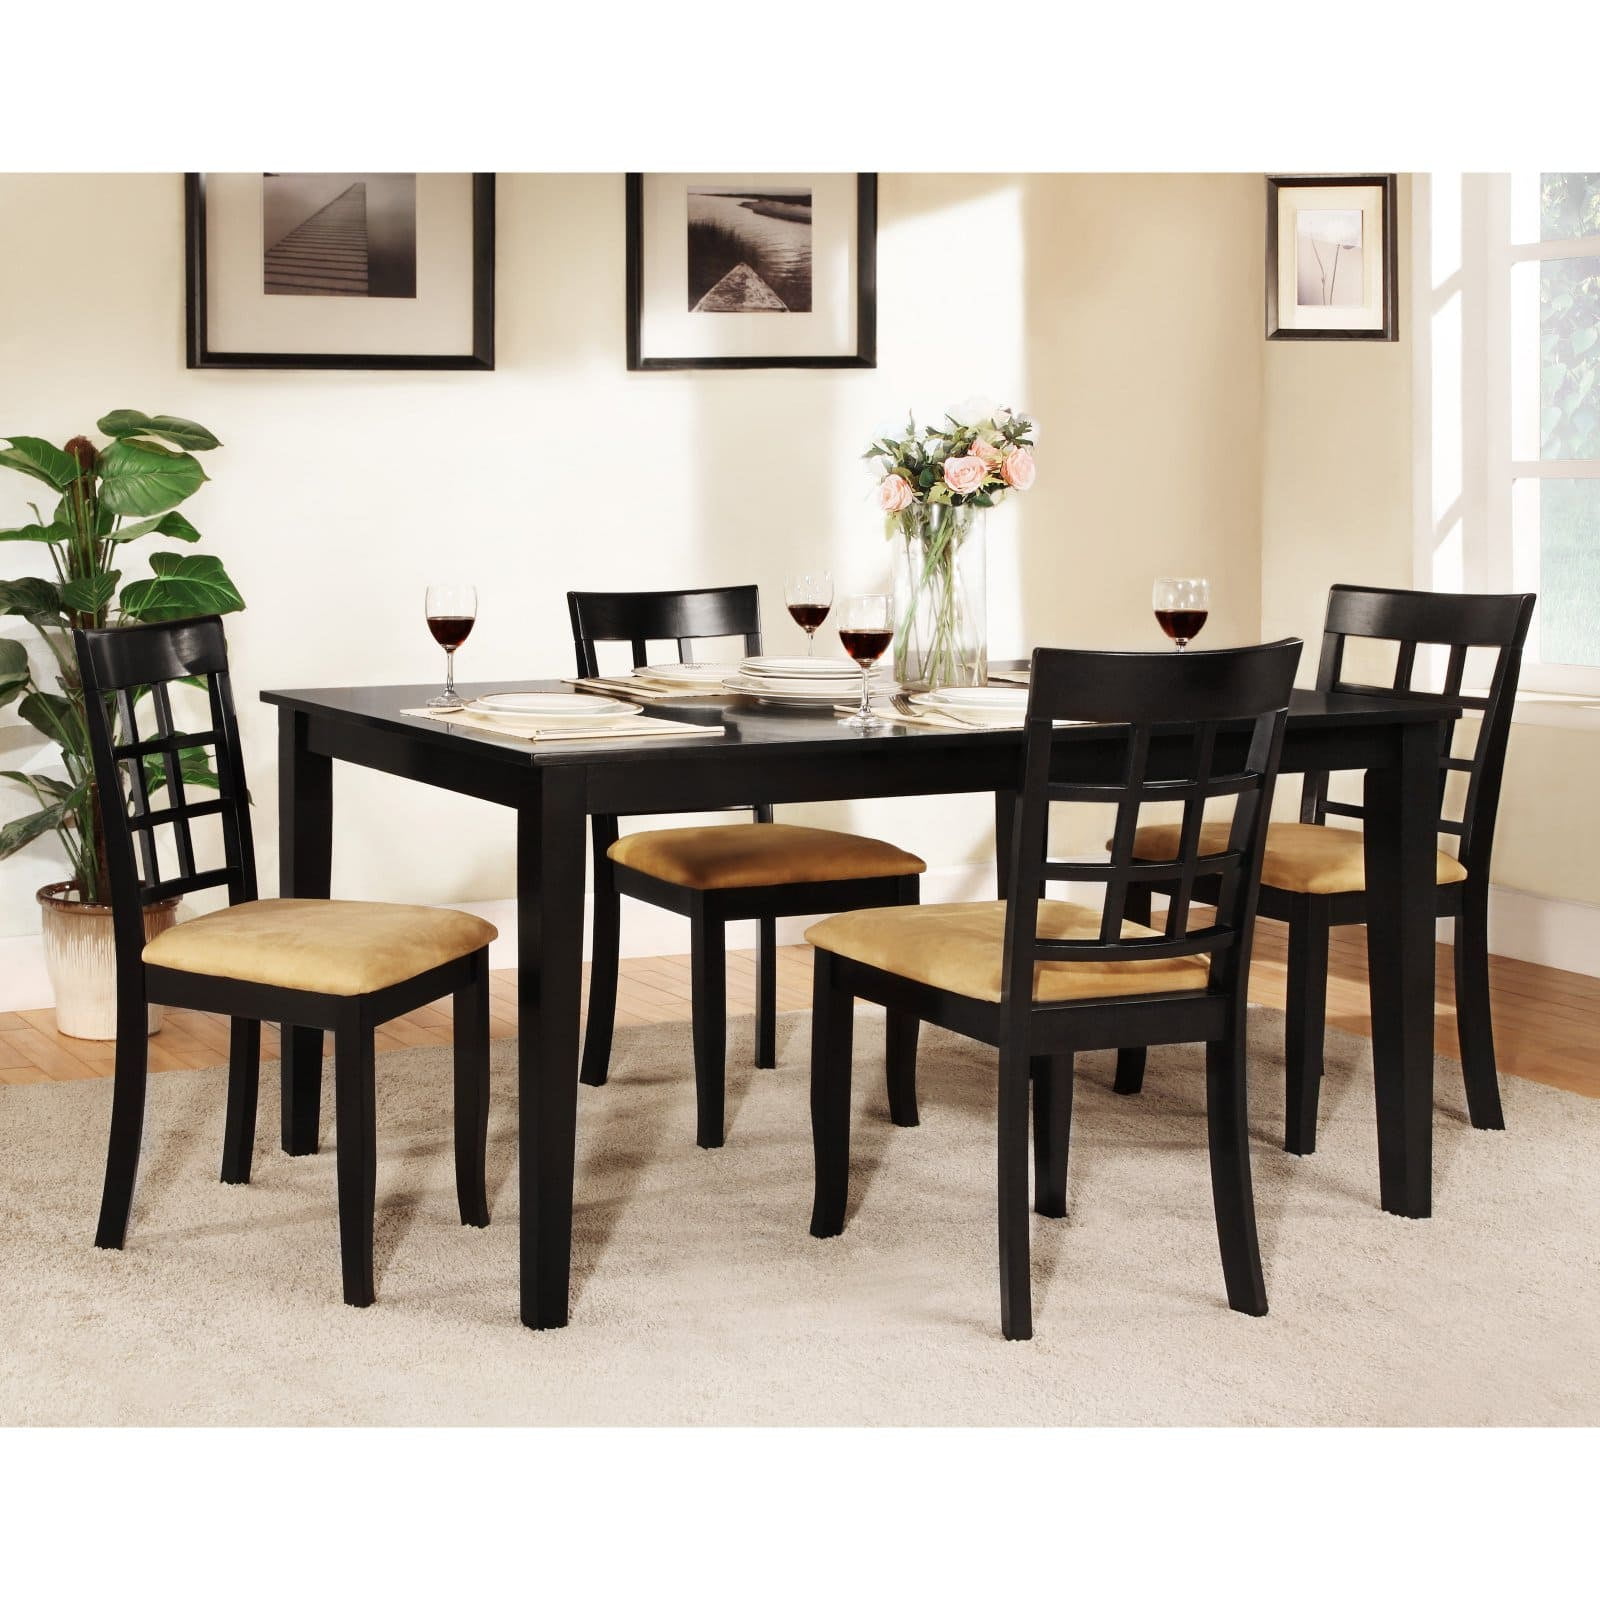 Homelegance Tibalt 5 pc. Rectangle Black Dining Table Set - 60 in. with ...